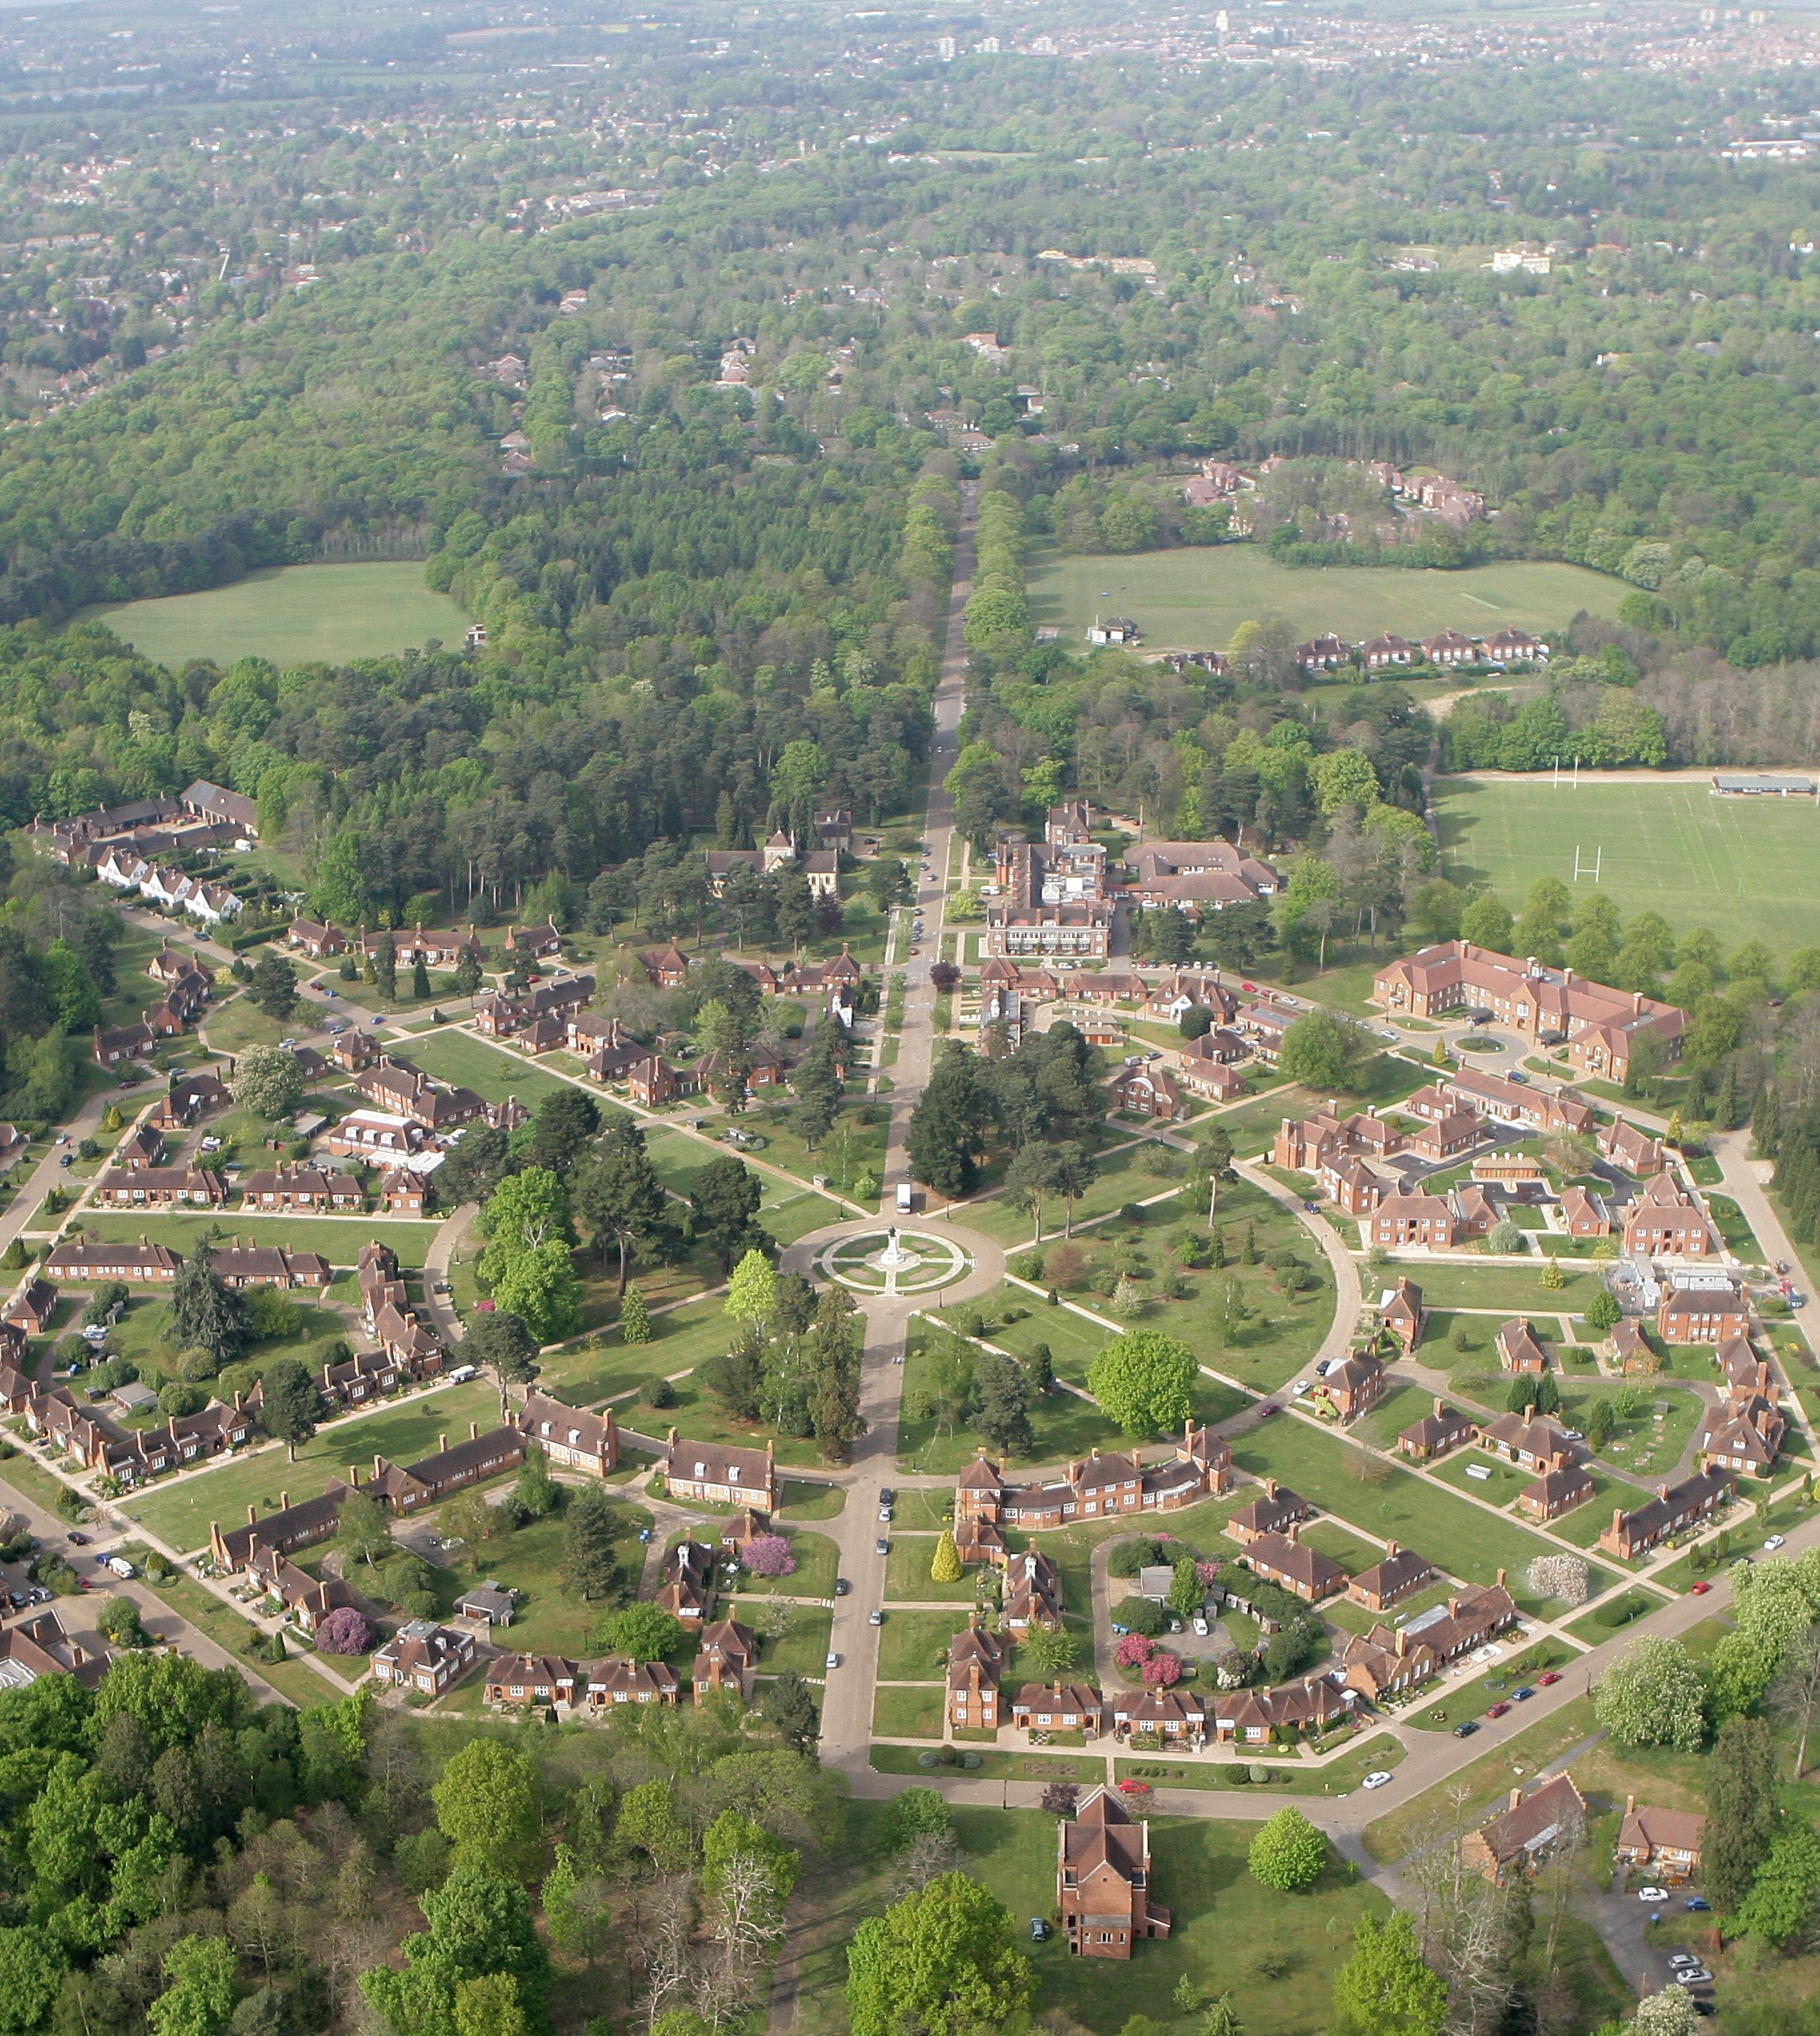 File:Aerial View of Whiteley Village.jpg - Wikimedia Commons